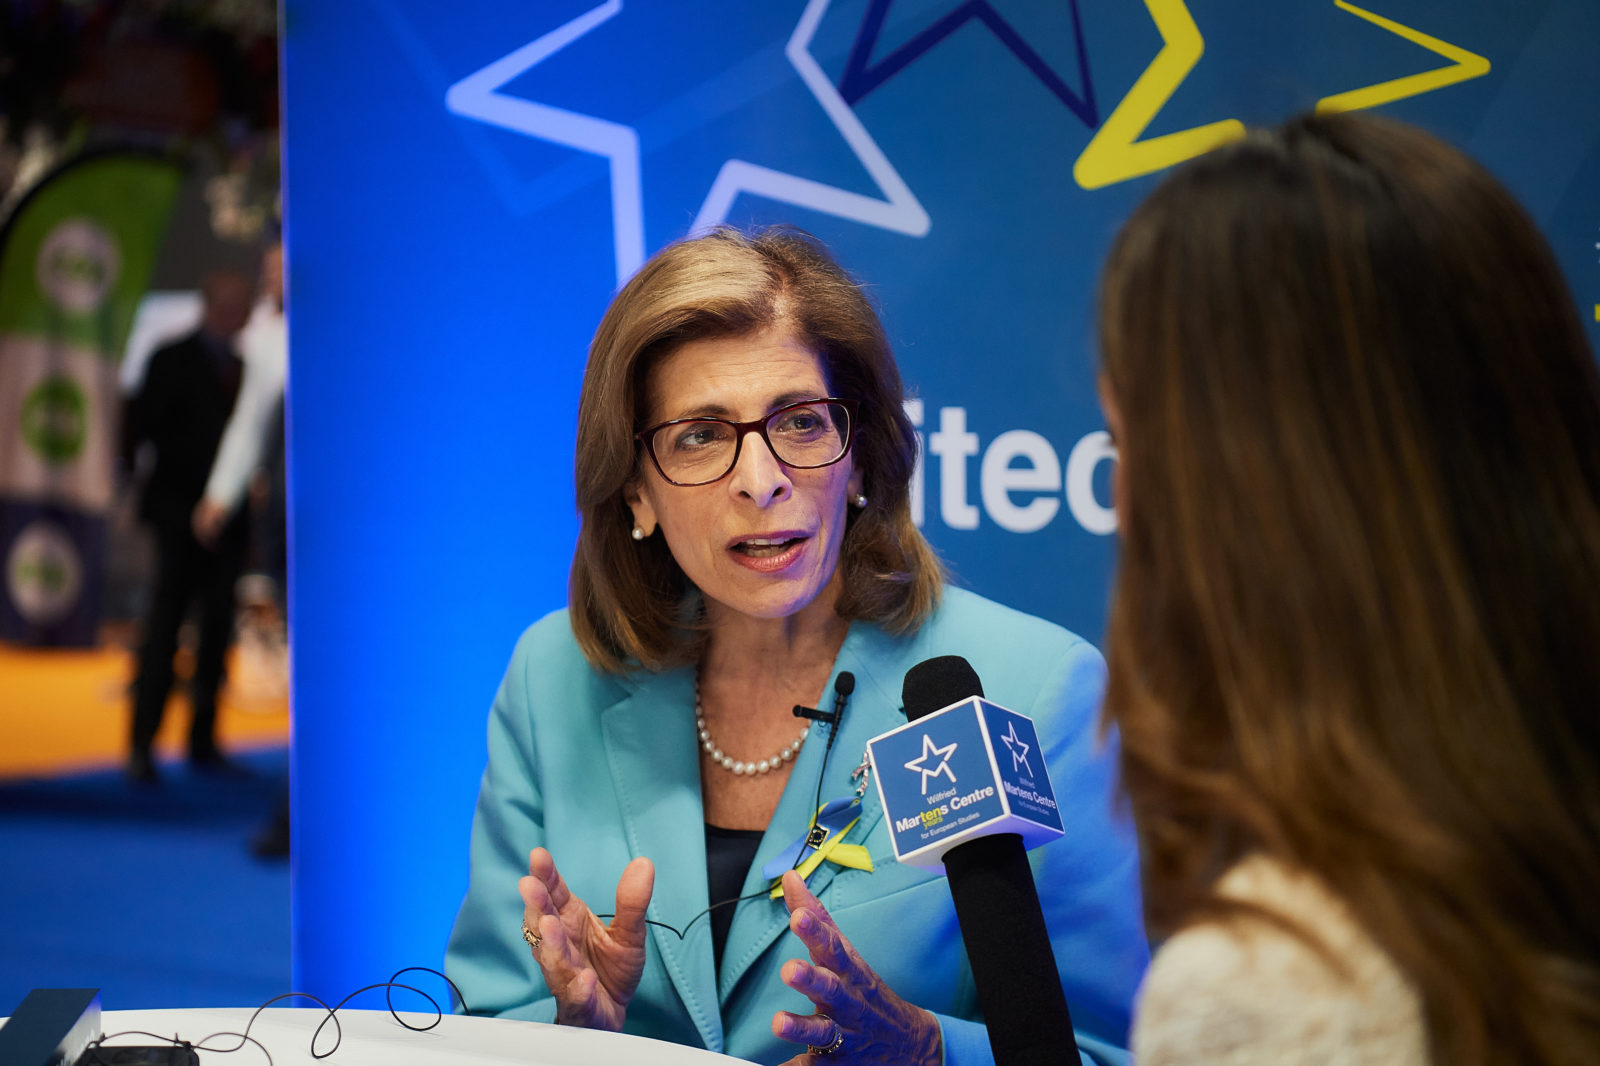 Interview with Stella Kyriakides, EU Commissioner for Health and Food Safety